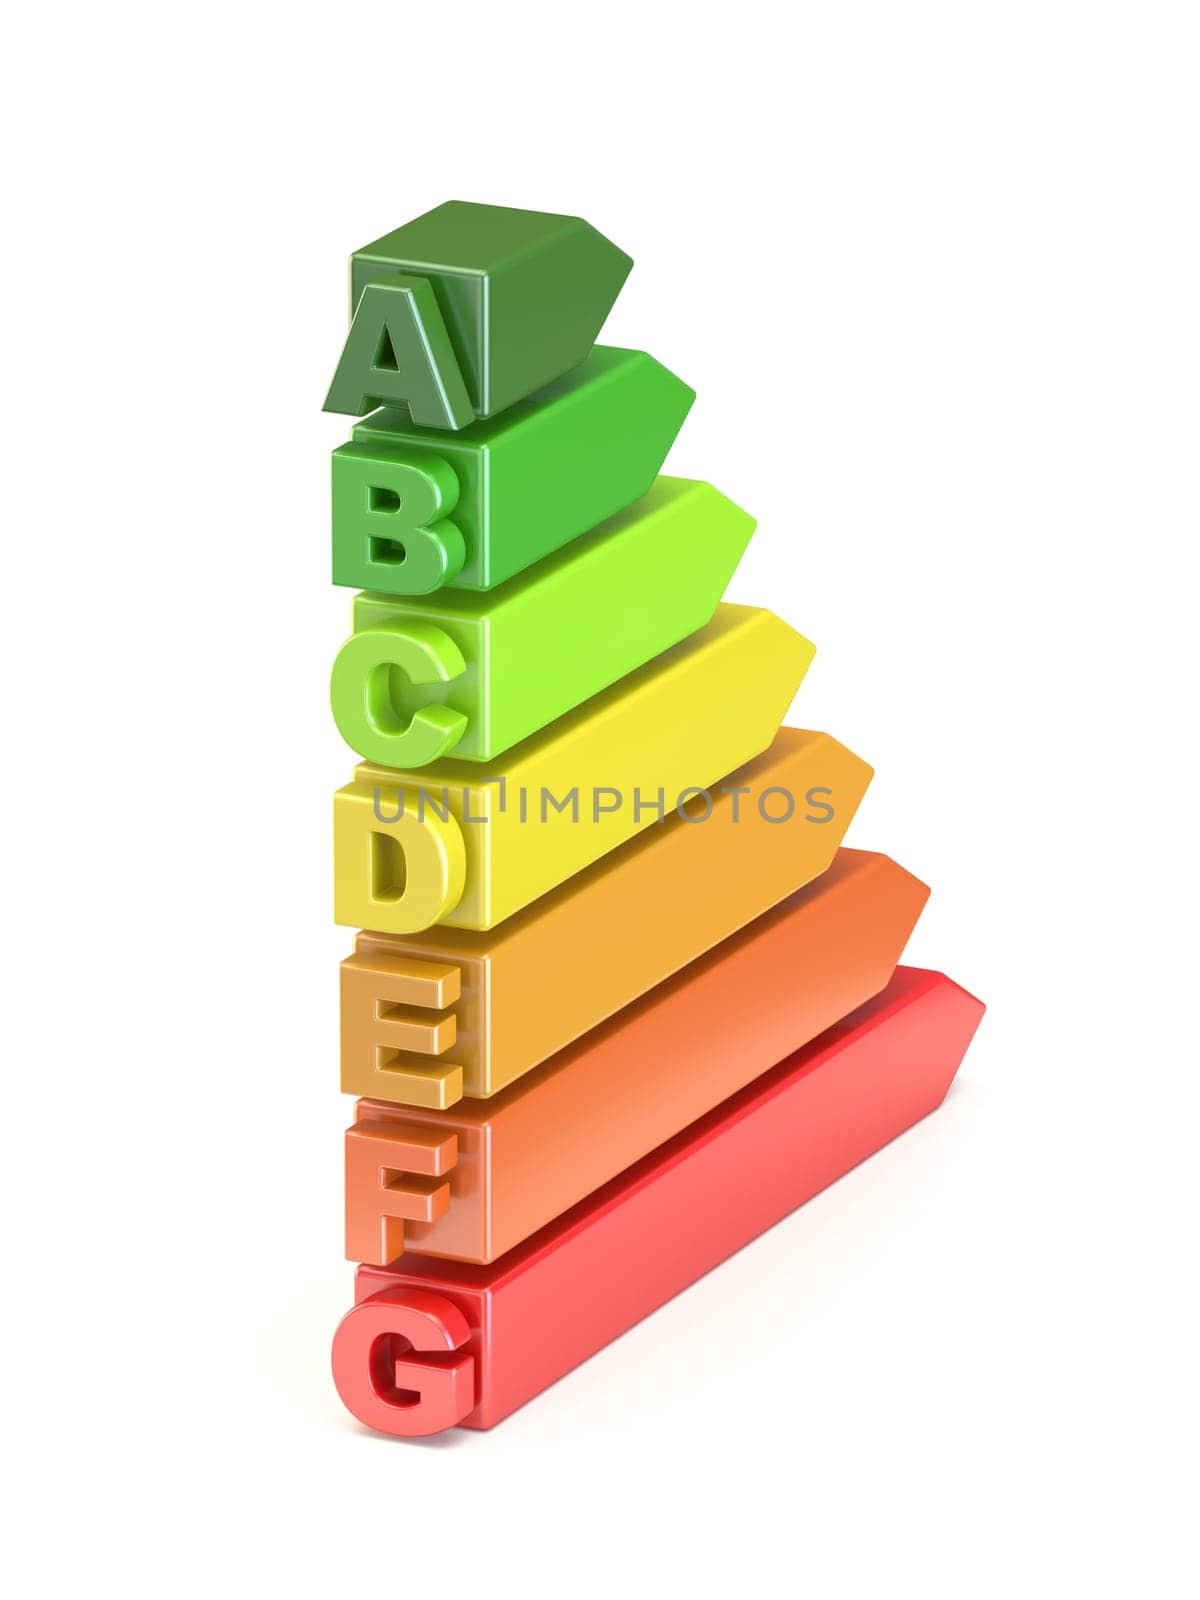 Energy efficiency category sign 3D rendering illustration isolated on white background